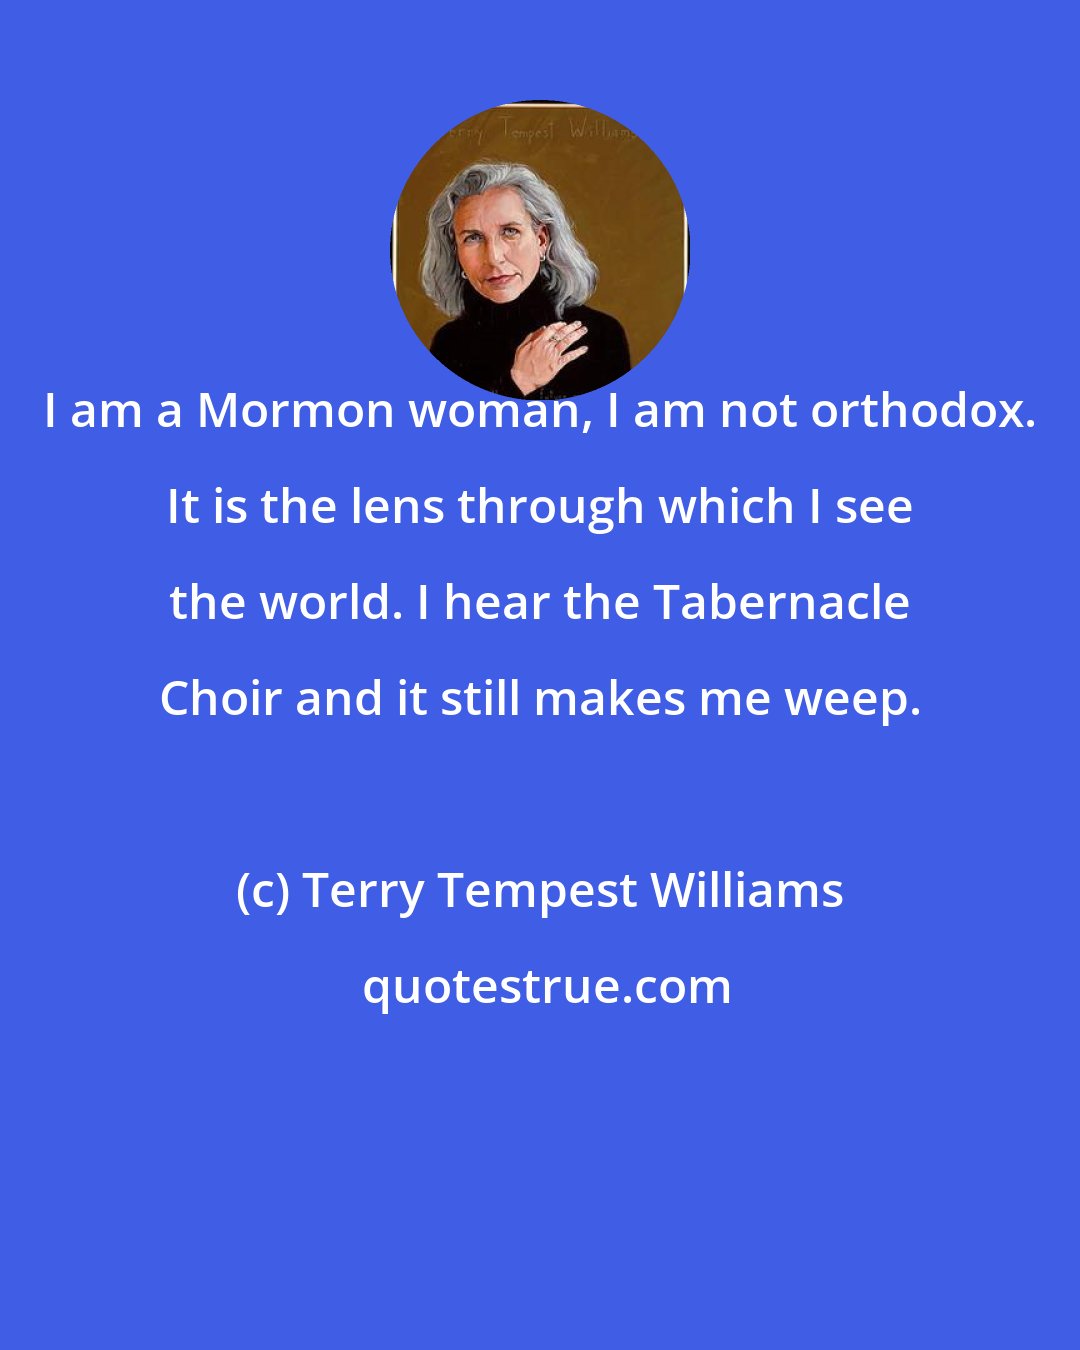 Terry Tempest Williams: I am a Mormon woman, I am not orthodox. It is the lens through which I see the world. I hear the Tabernacle Choir and it still makes me weep.